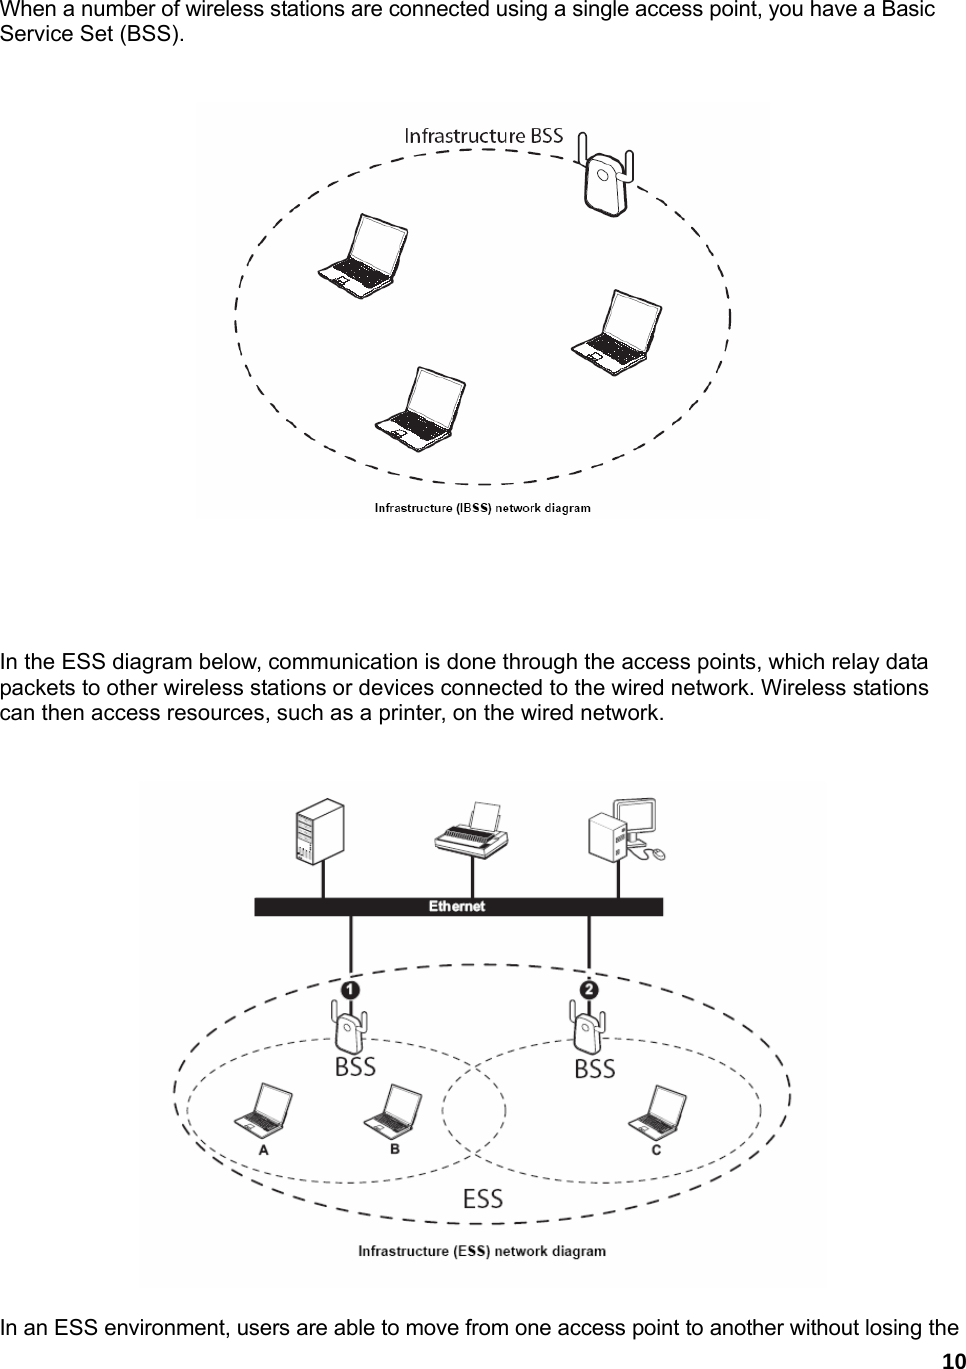 10  When a number of wireless stations are connected using a single access point, you have a Basic Service Set (BSS).         In the ESS diagram below, communication is done through the access points, which relay data packets to other wireless stations or devices connected to the wired network. Wireless stations can then access resources, such as a printer, on the wired network.     In an ESS environment, users are able to move from one access point to another without losing the 